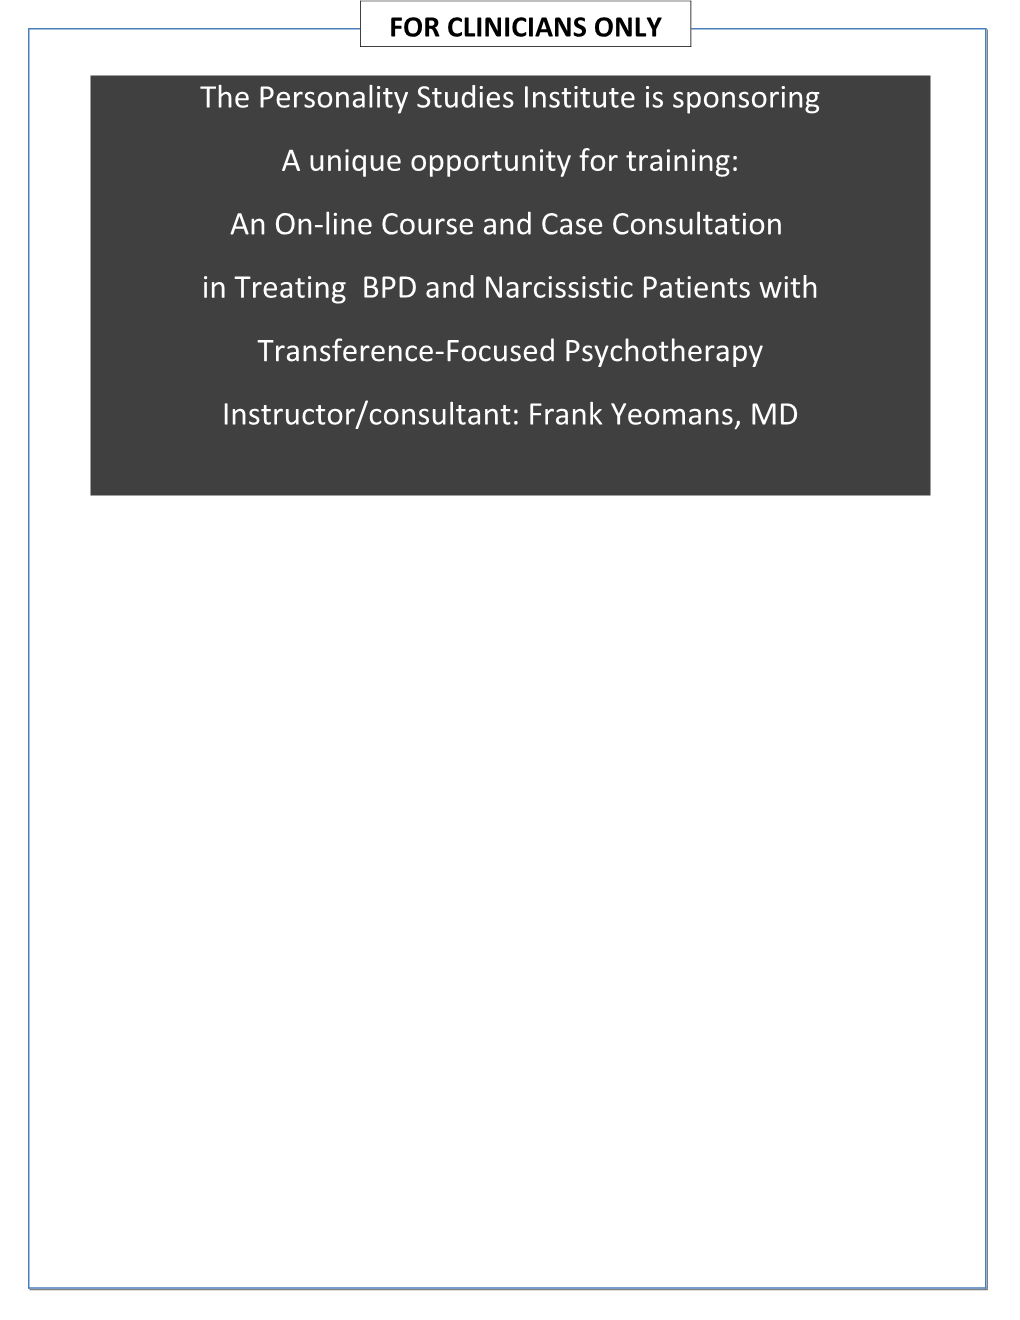 Mentalization Based Treatment (MBT) for Borderline Personality Disorder: Introduction To